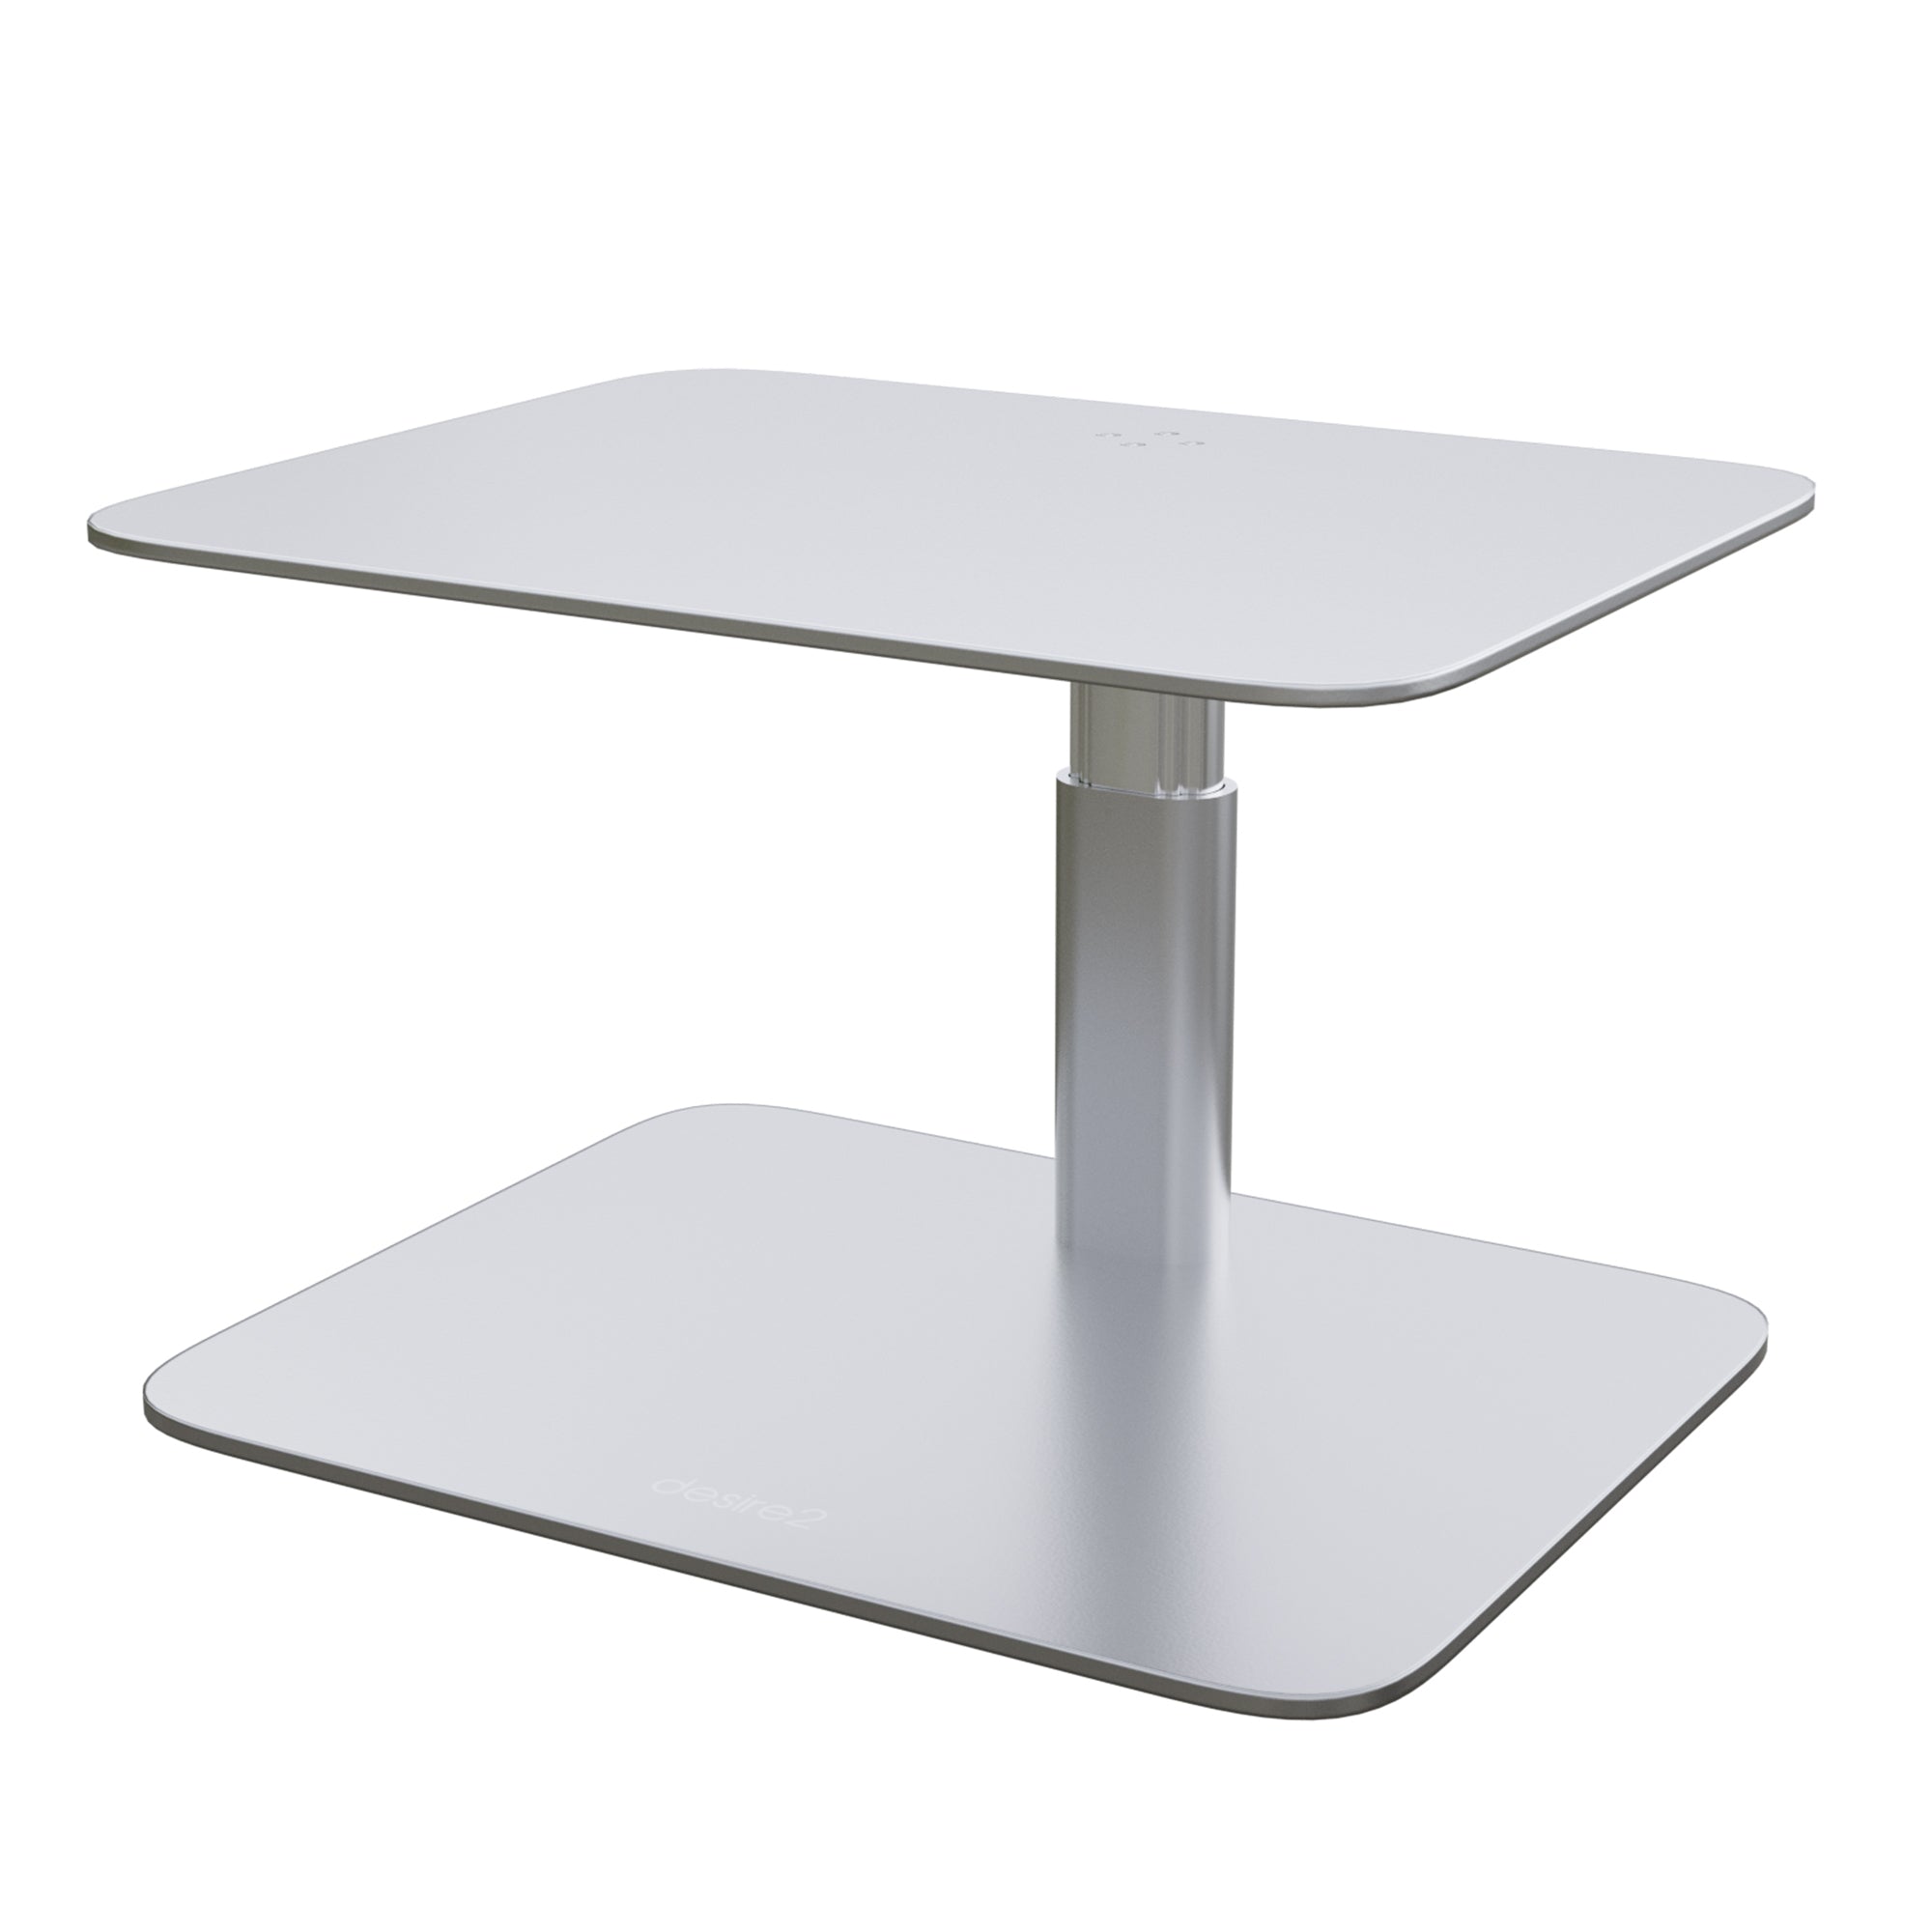 Riser Carbon Steel Monitor Stand